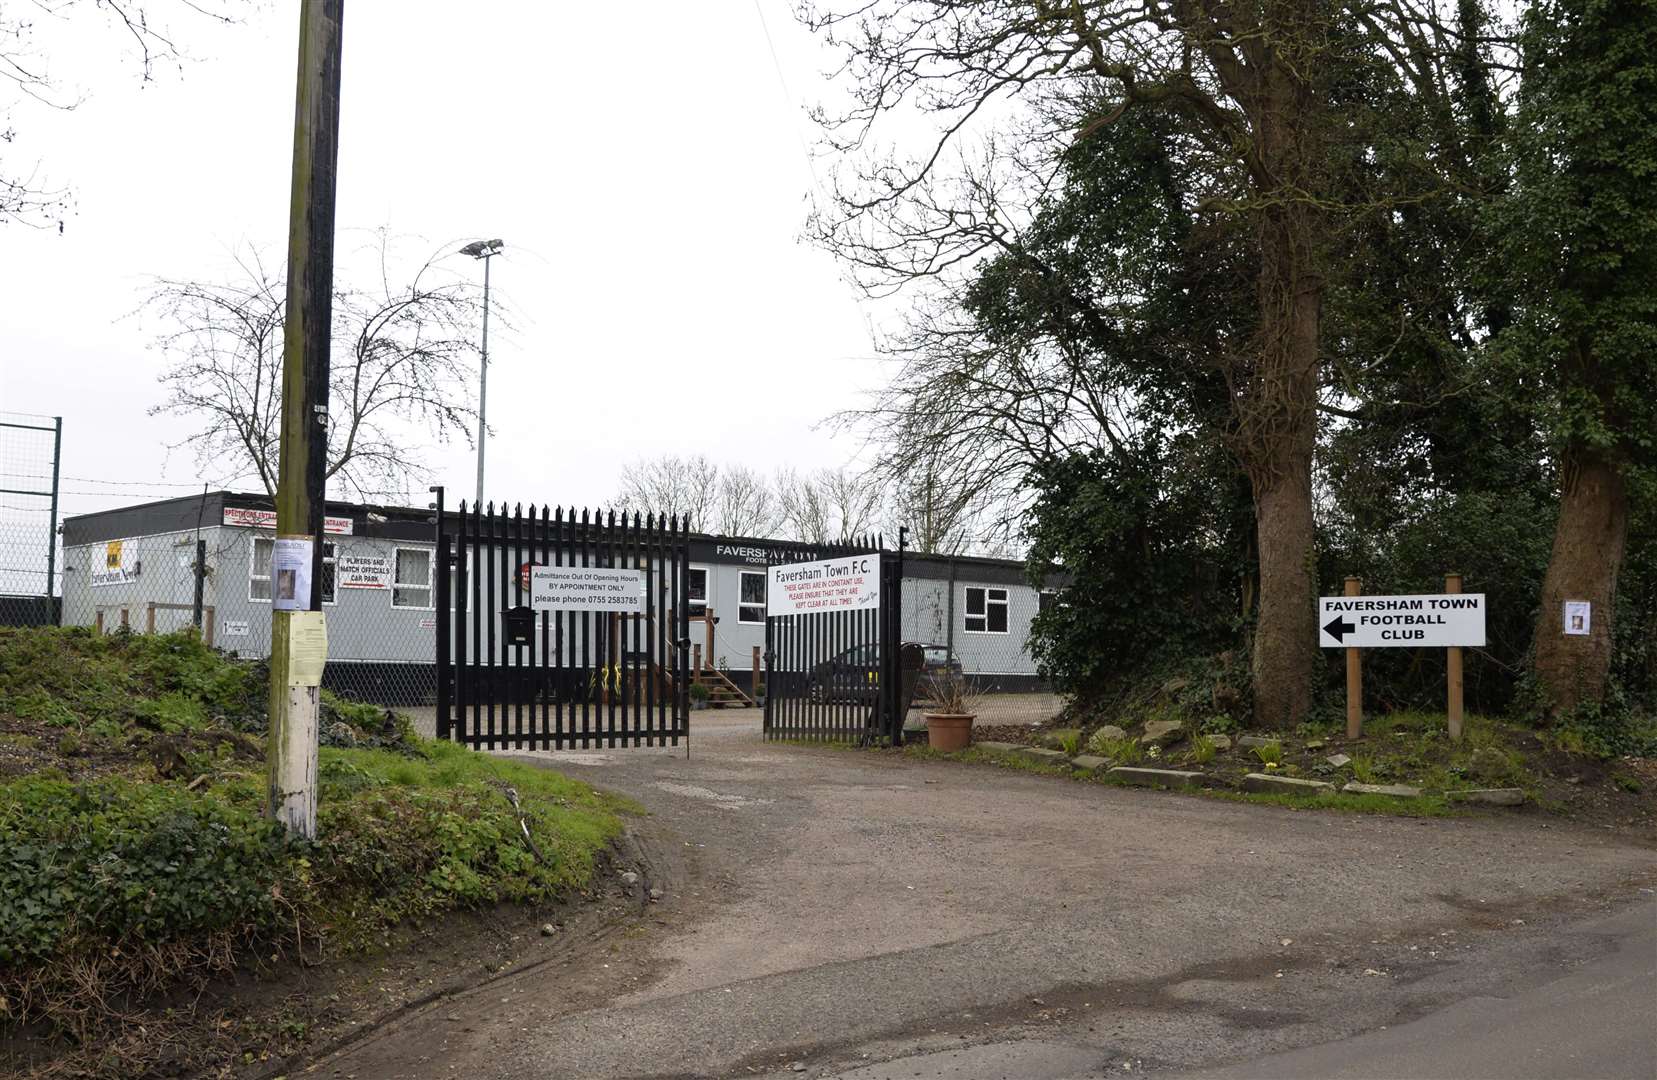 The entrance to Faversham Town FC's home ground, pictured in 2016